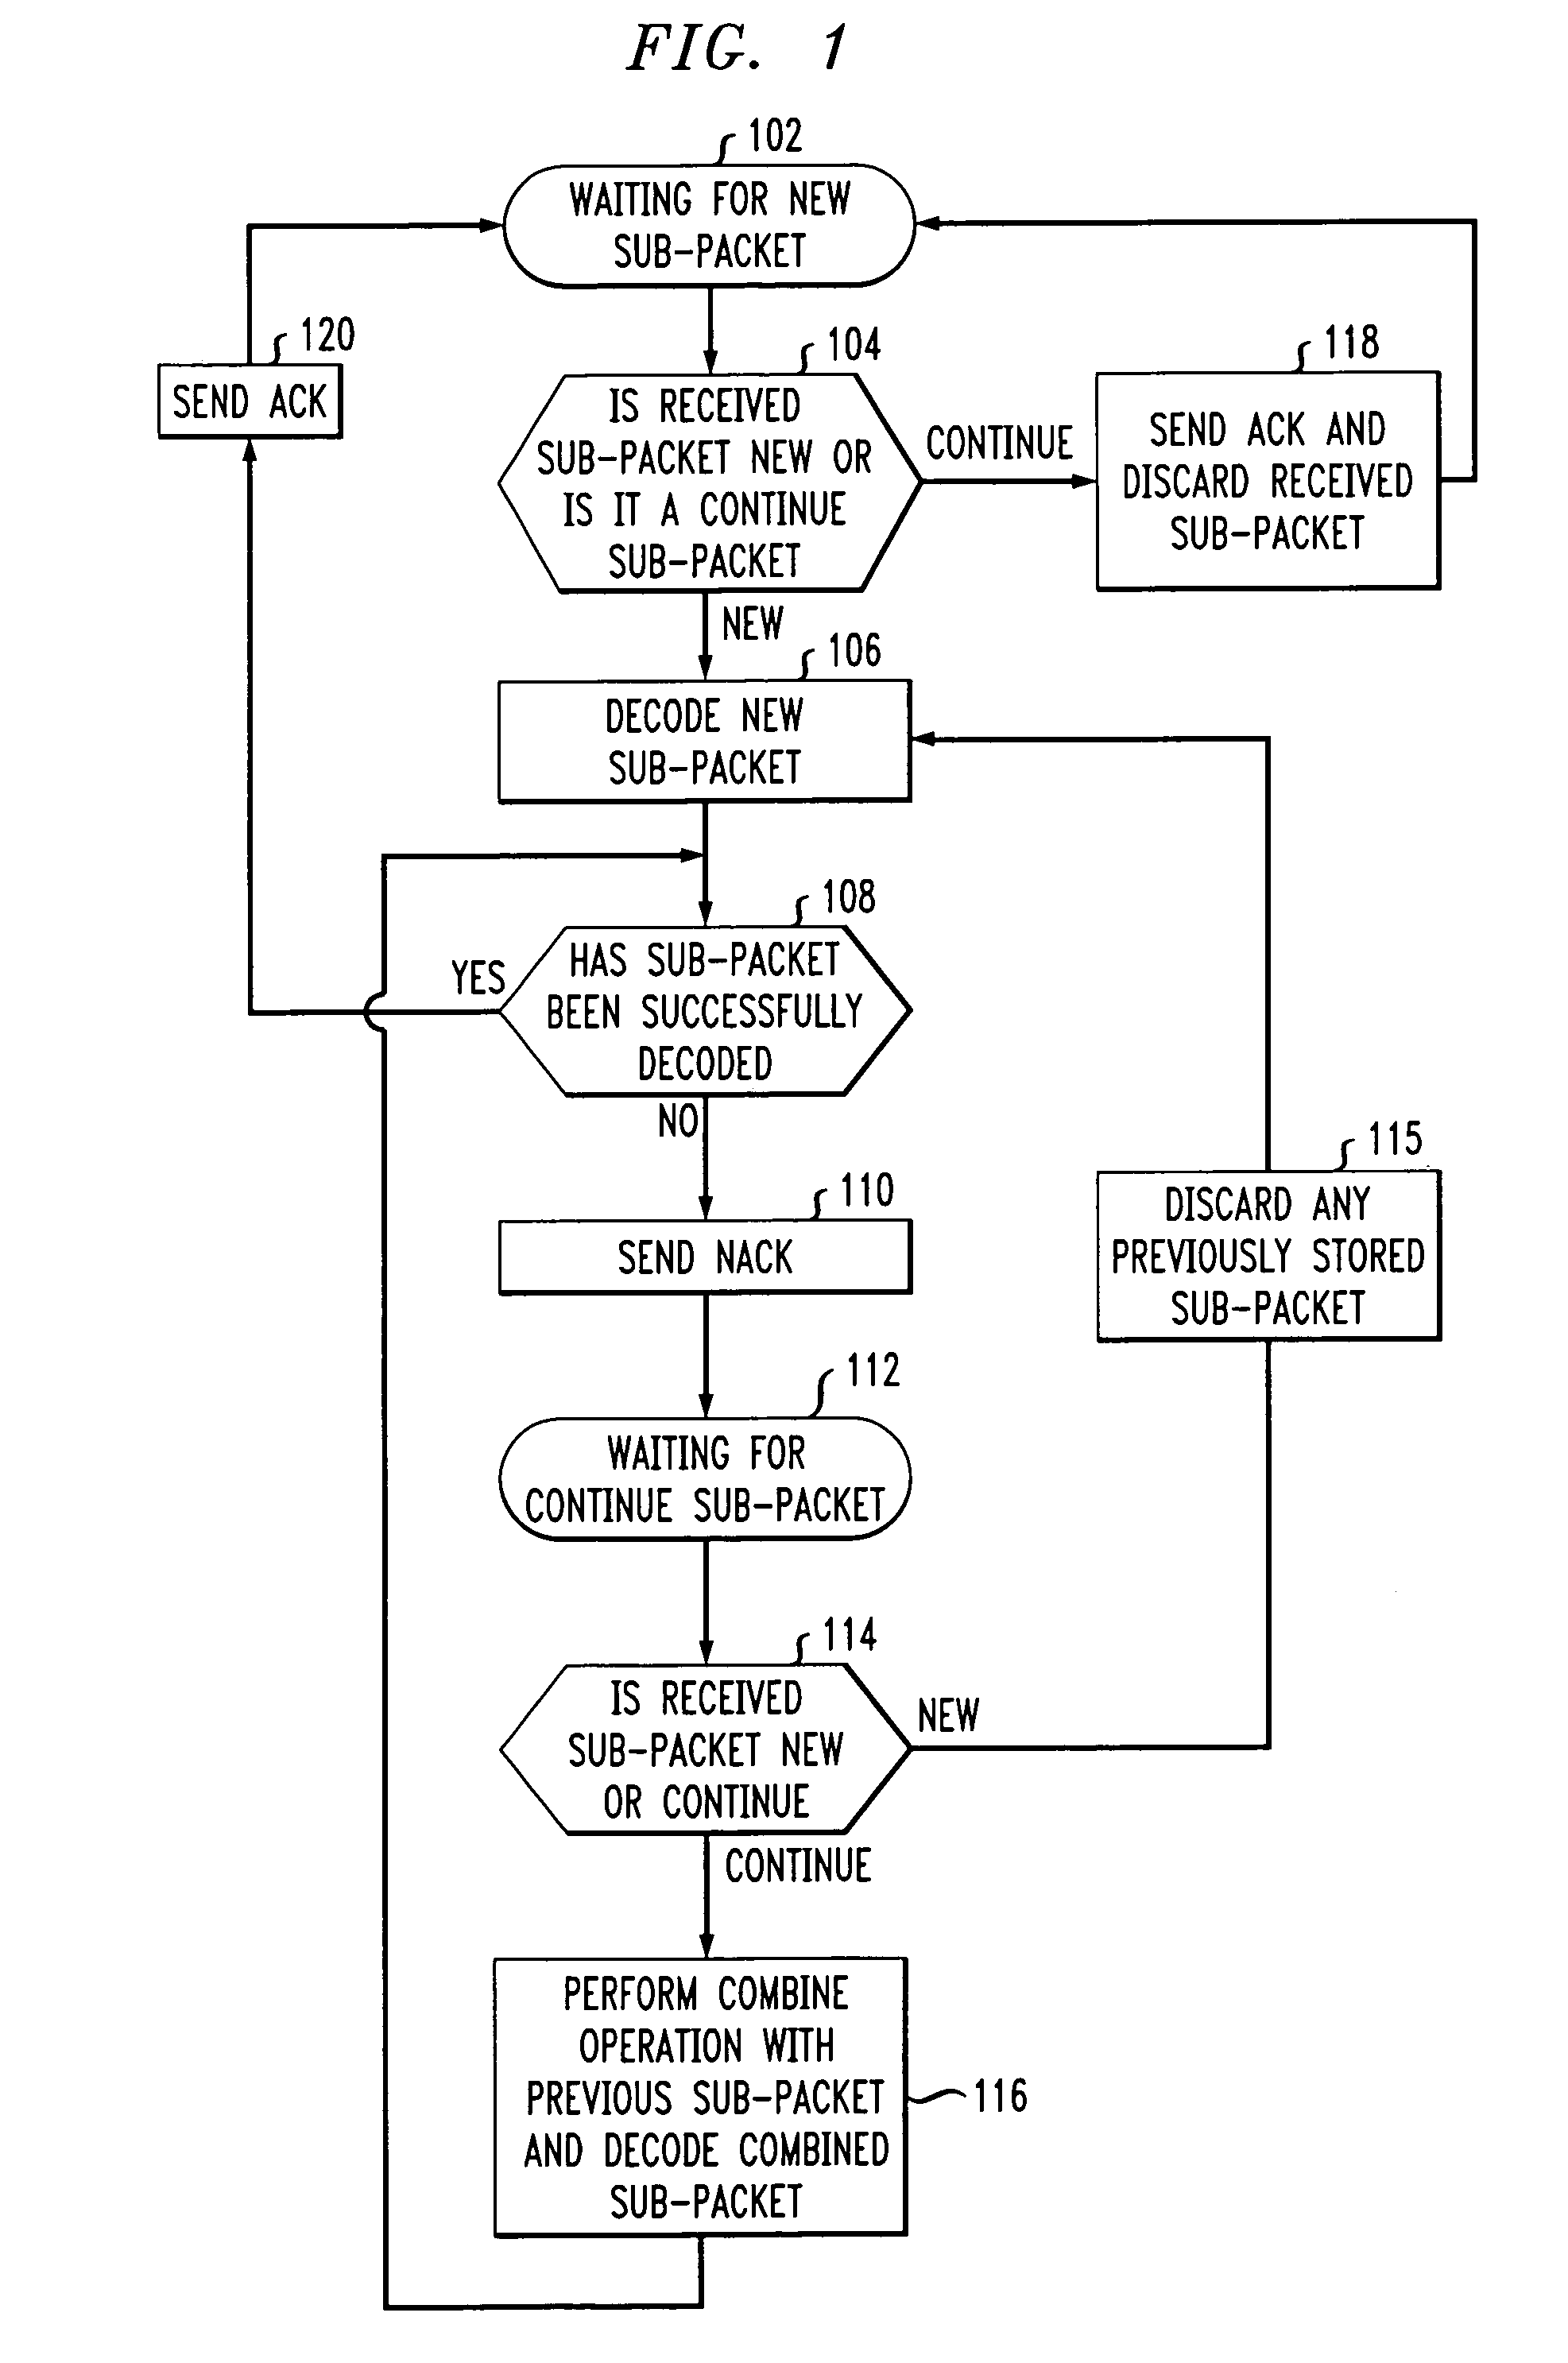 Method and apparatus for asynchronous incremental redundancy reception in a communication system